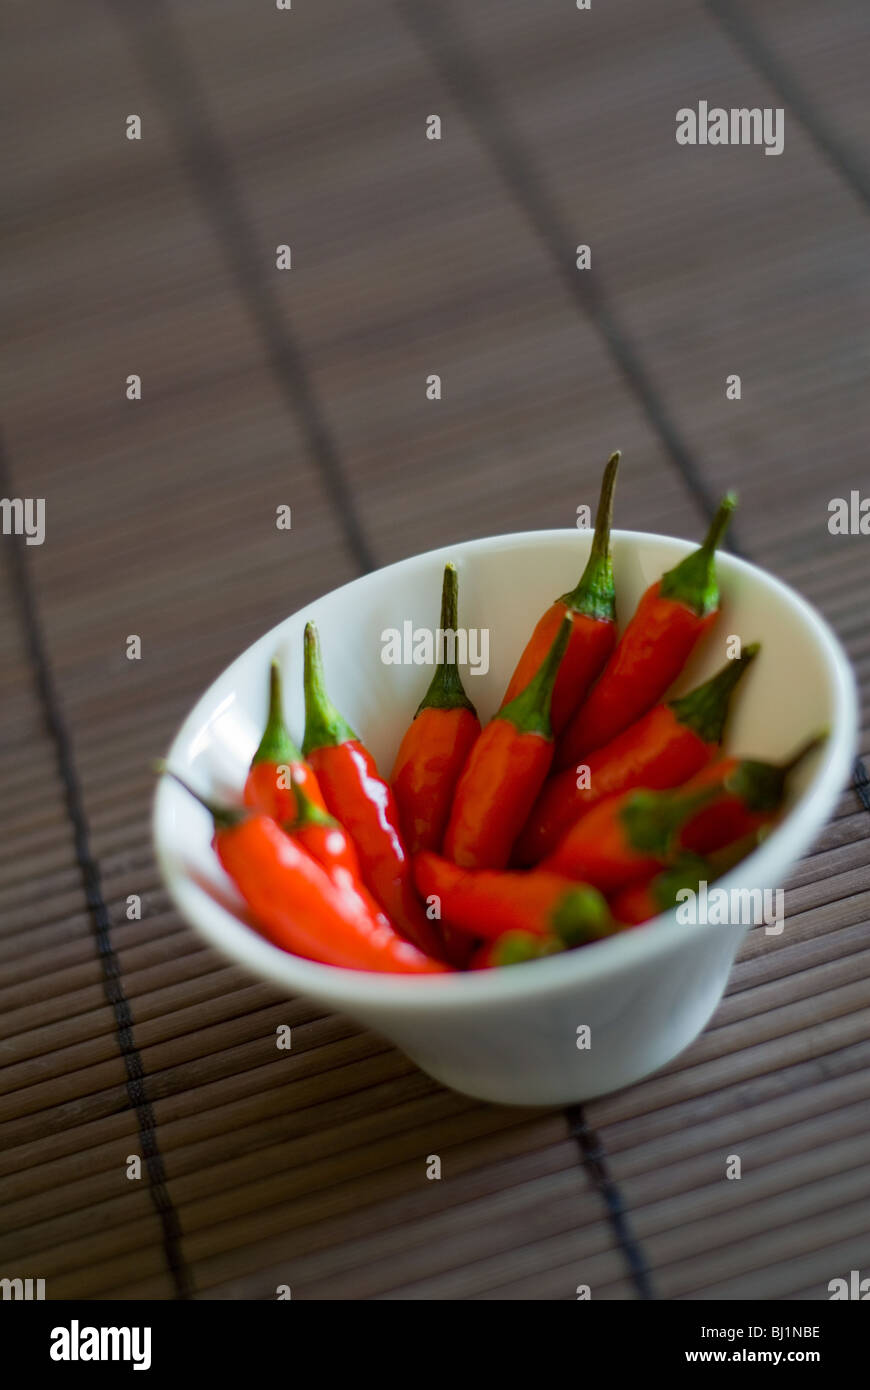 A white bowl of whole red chillis on a bamboo surface Stock Photo